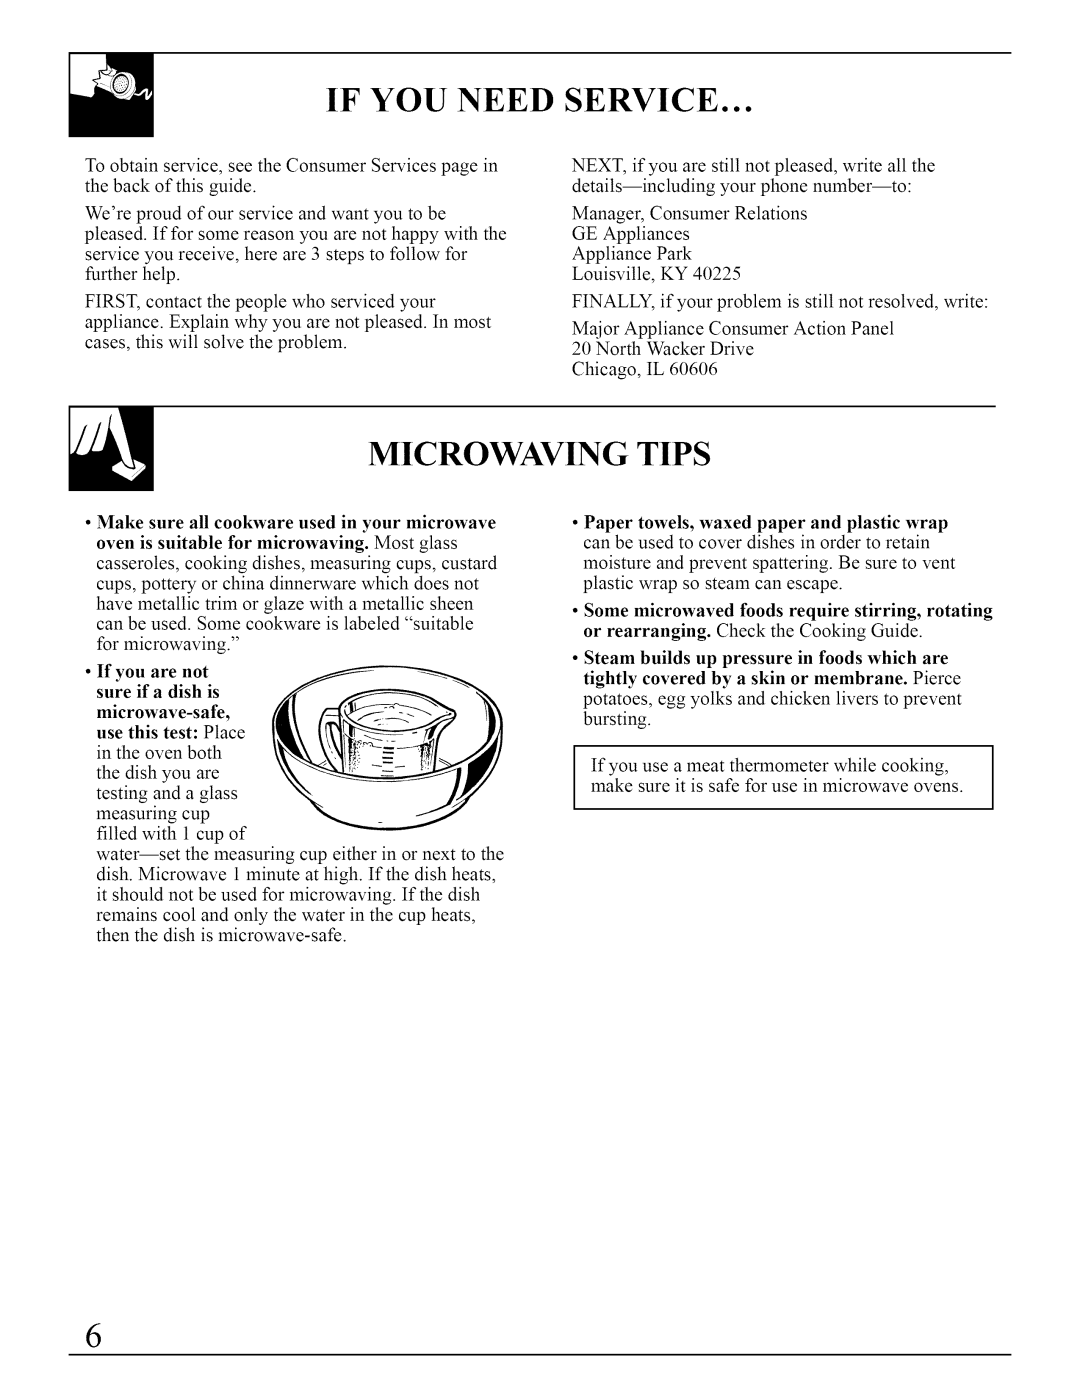 GE JVM290 manual If You Need Service, Microwaving Tips, Appliance Park, Make sure all cookware used in your microwave 